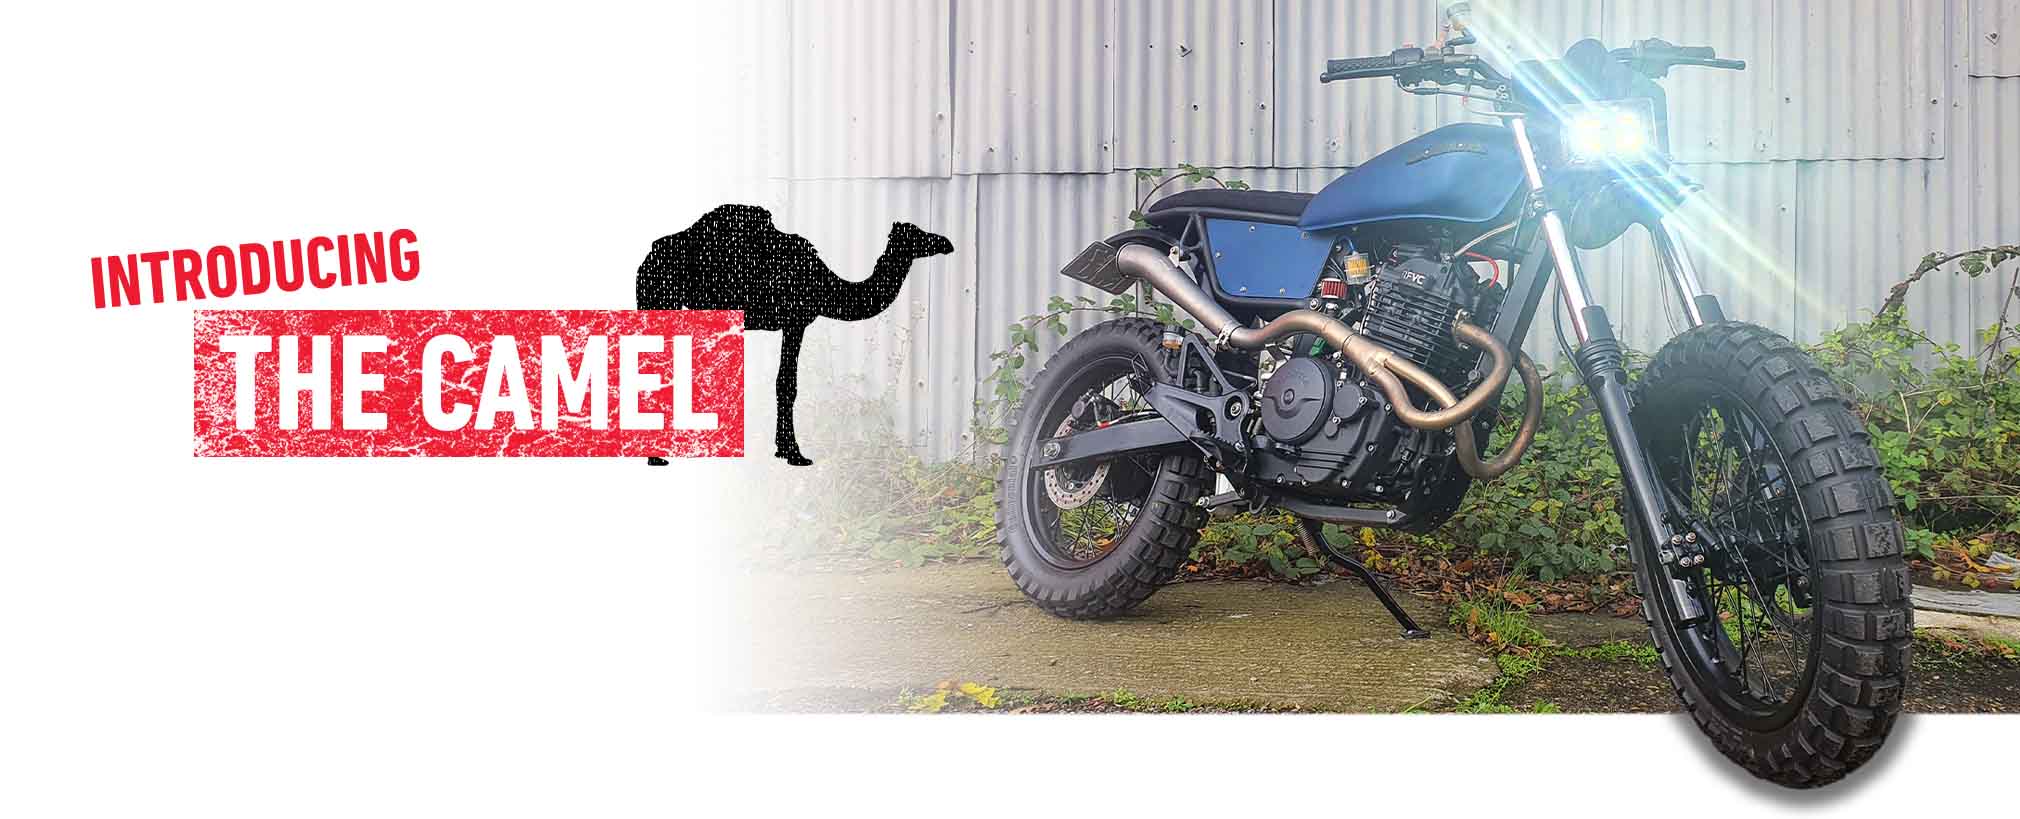 Introducing the Camel - From Maidstone Honda